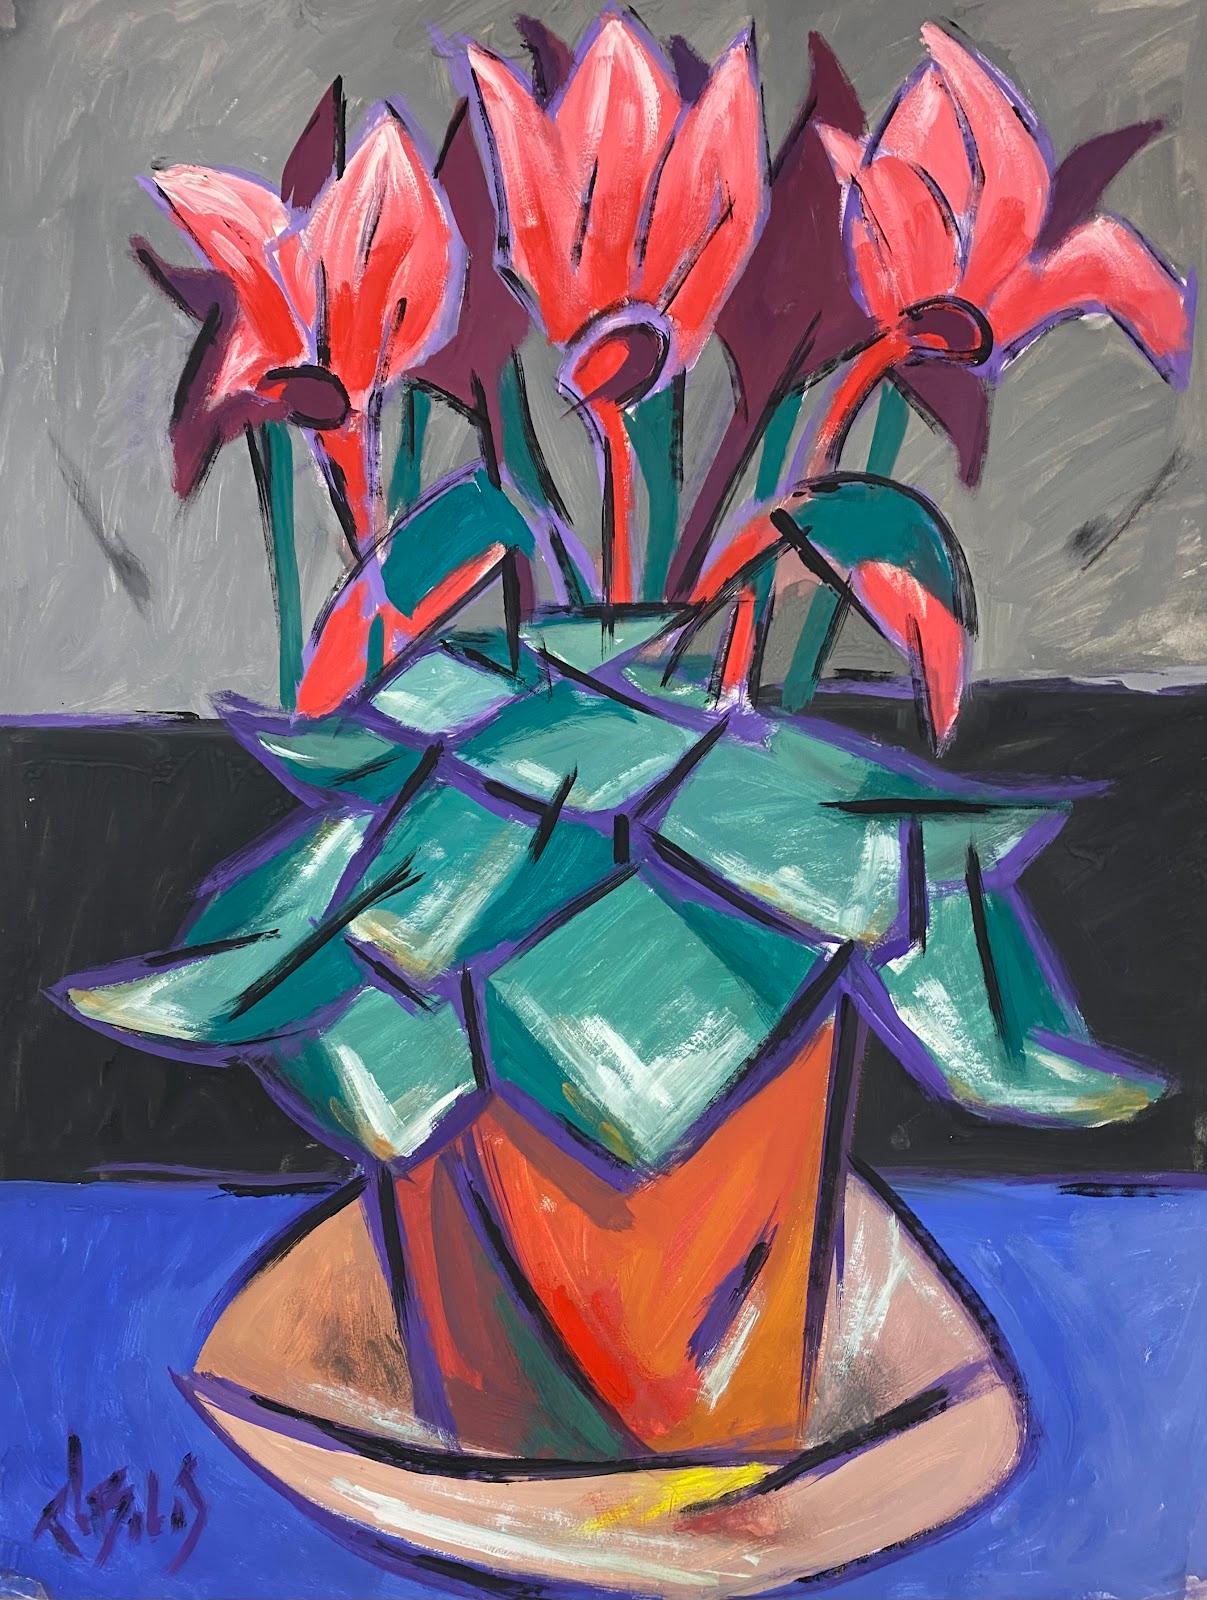 Paul-Louis Bolot (French 1918-2003) Interior Painting - 1970's French Modernist Painting Geometric Style Red Tulips in Terracota